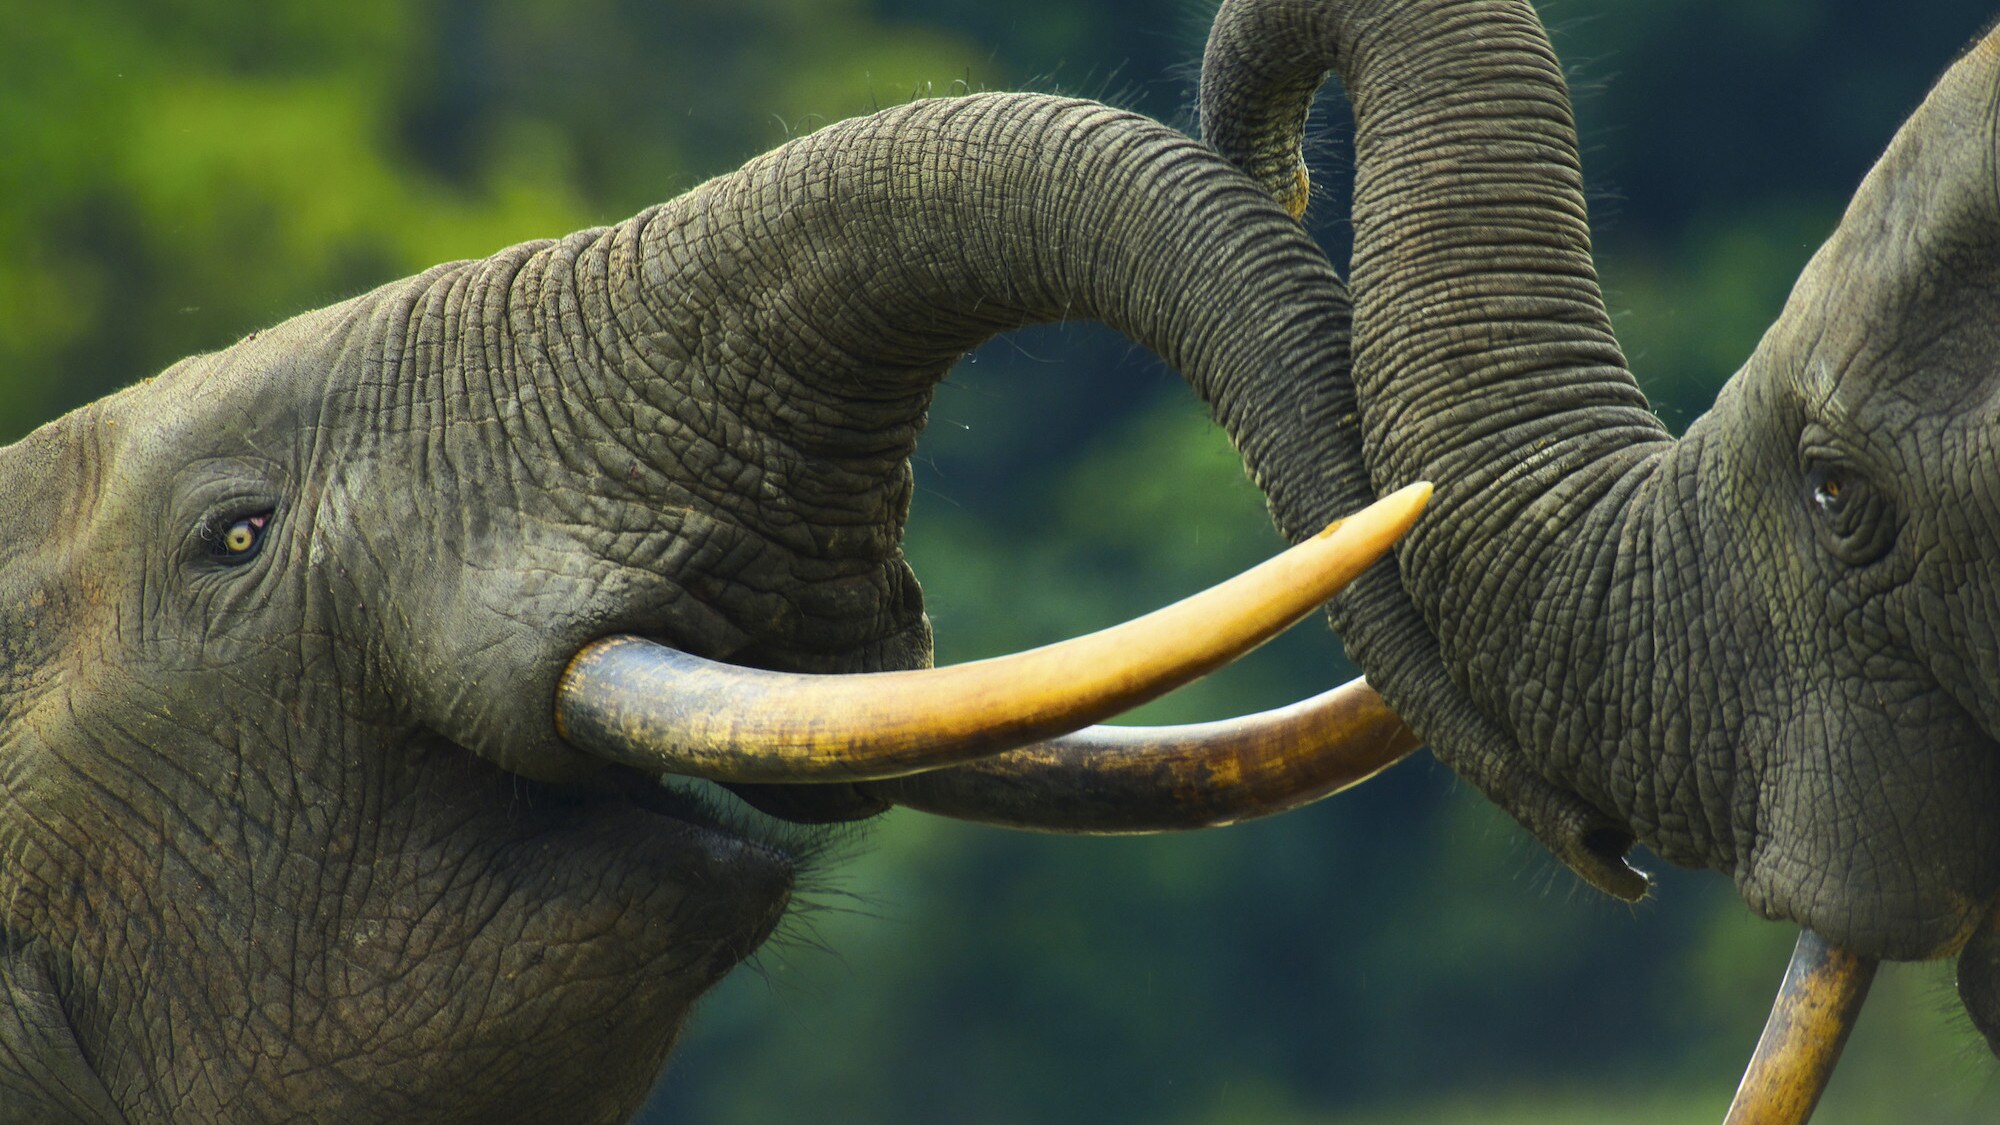 Two elephants with trunks together. (National Geographic for Disney+/Bertie Gregory)